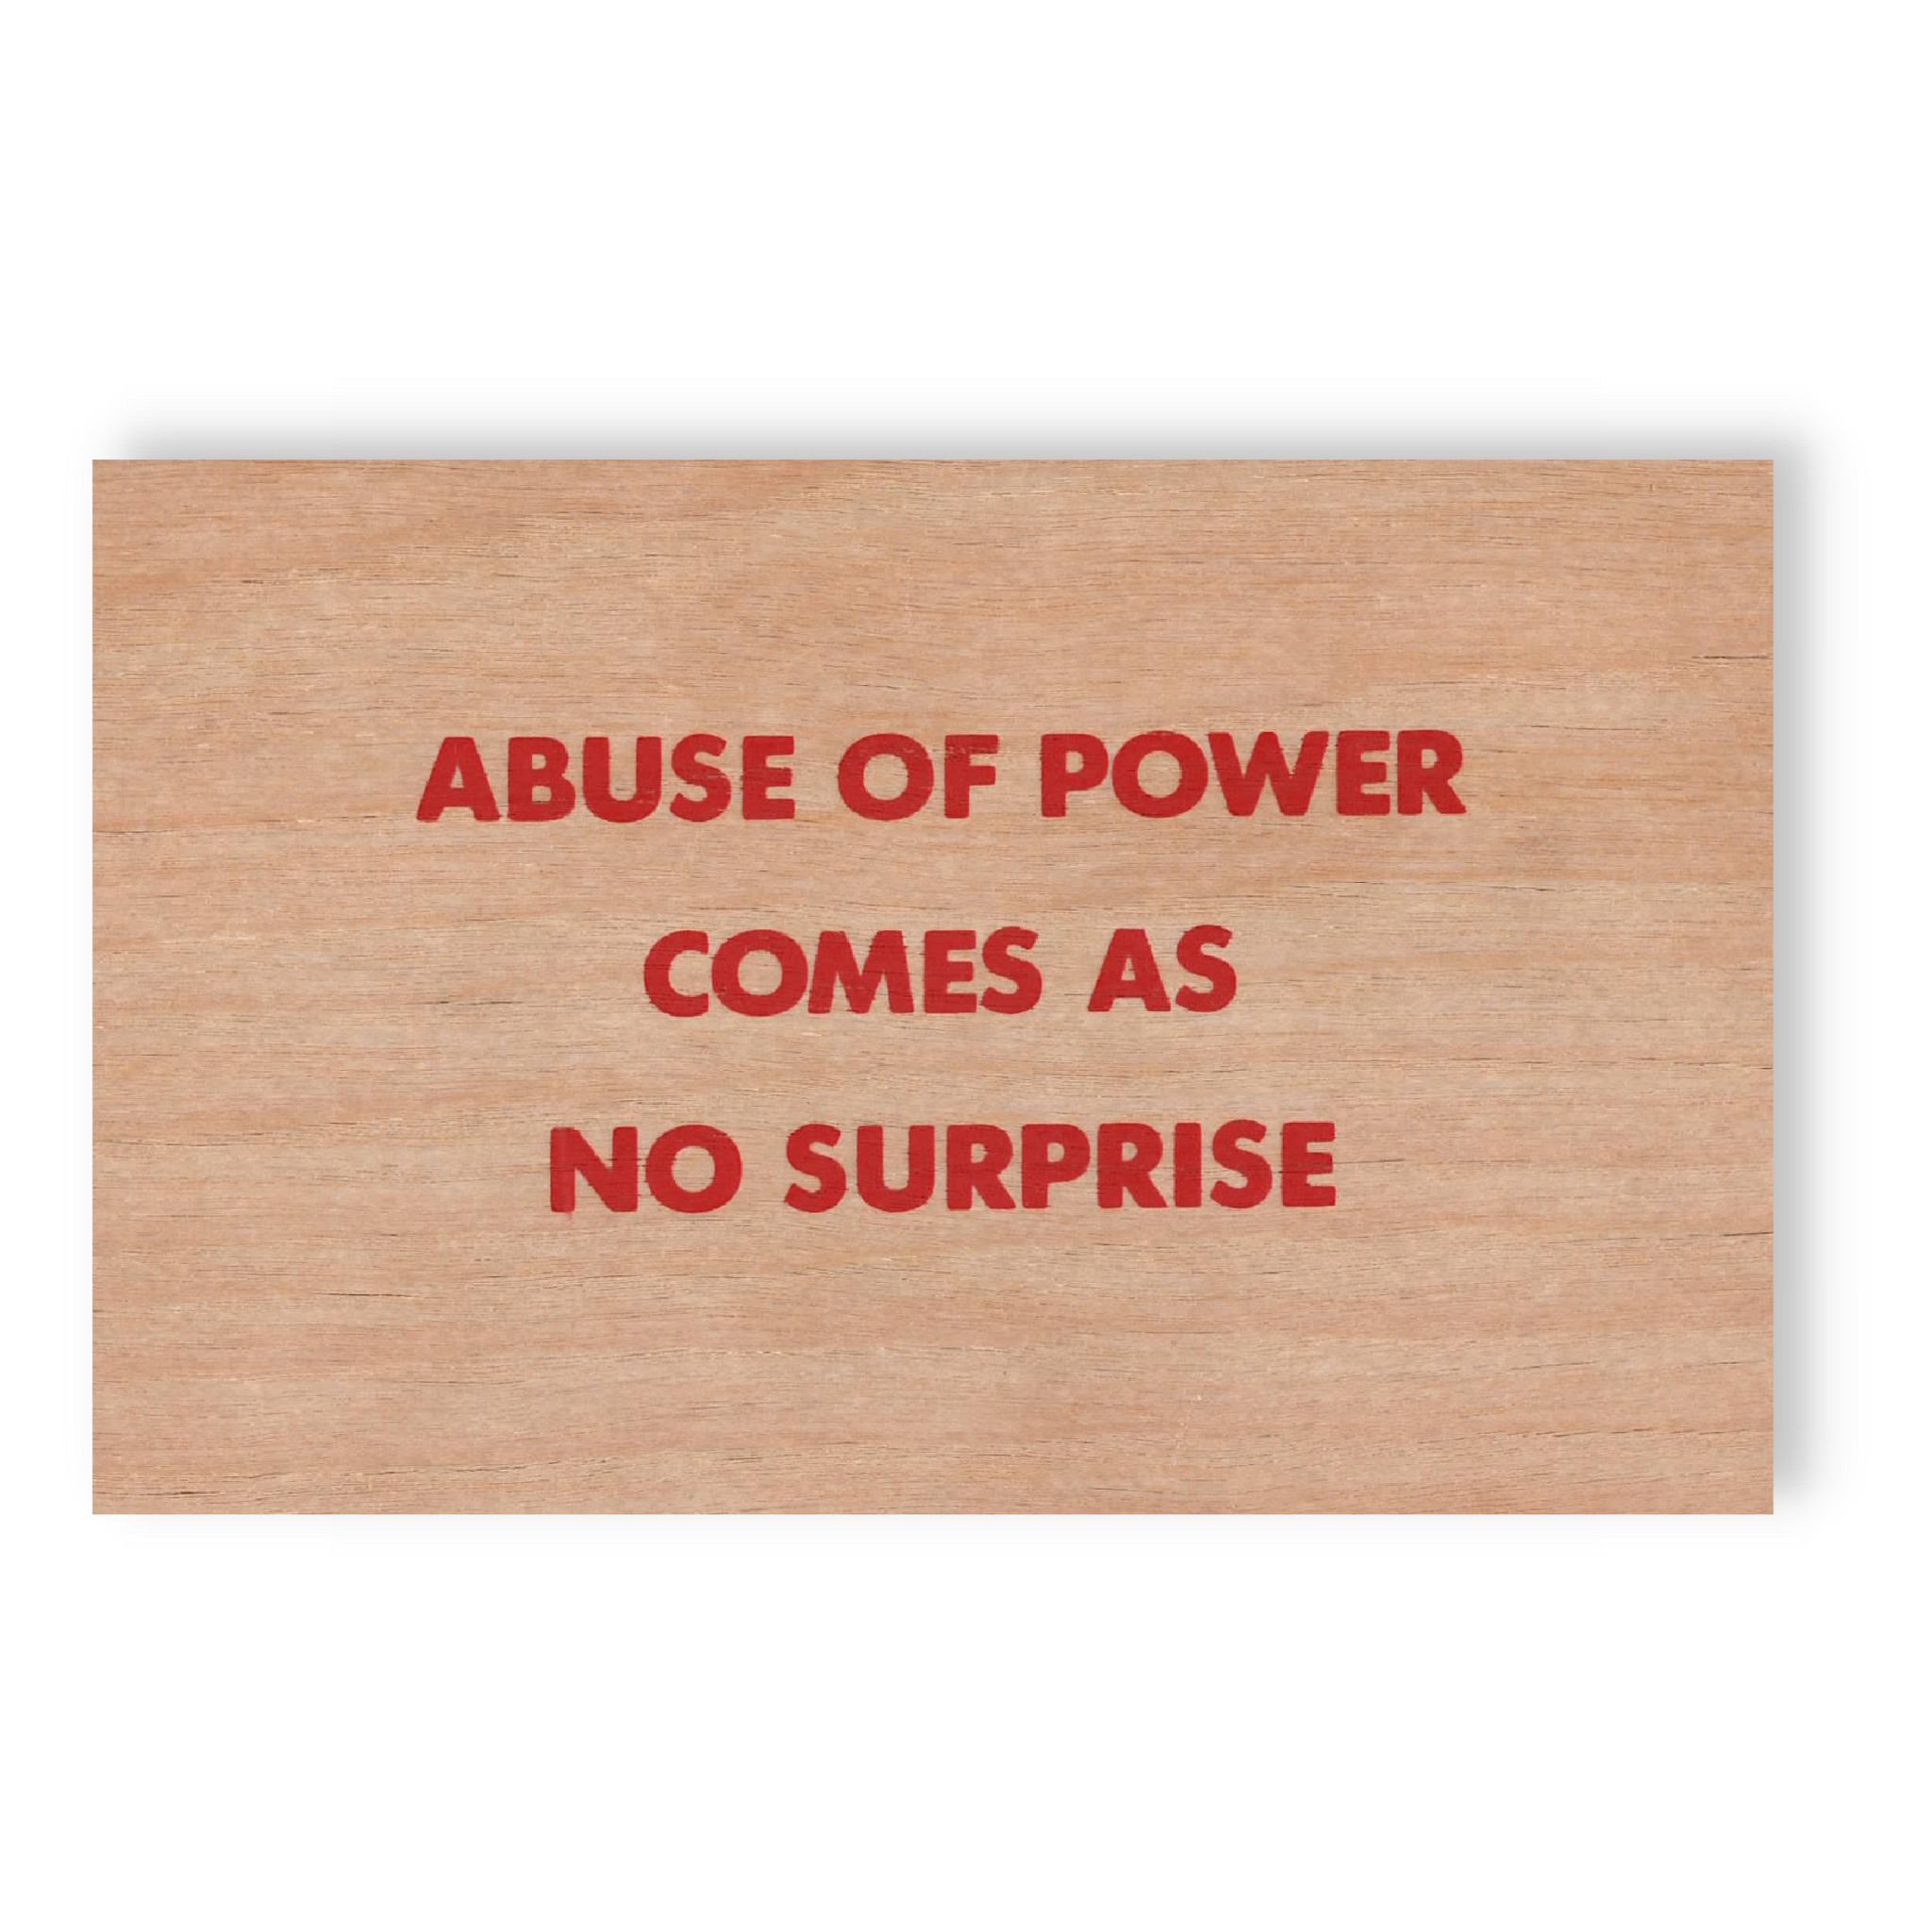 Jenny Holzer - Truism [Abuse of Power Comes As No Surprise]